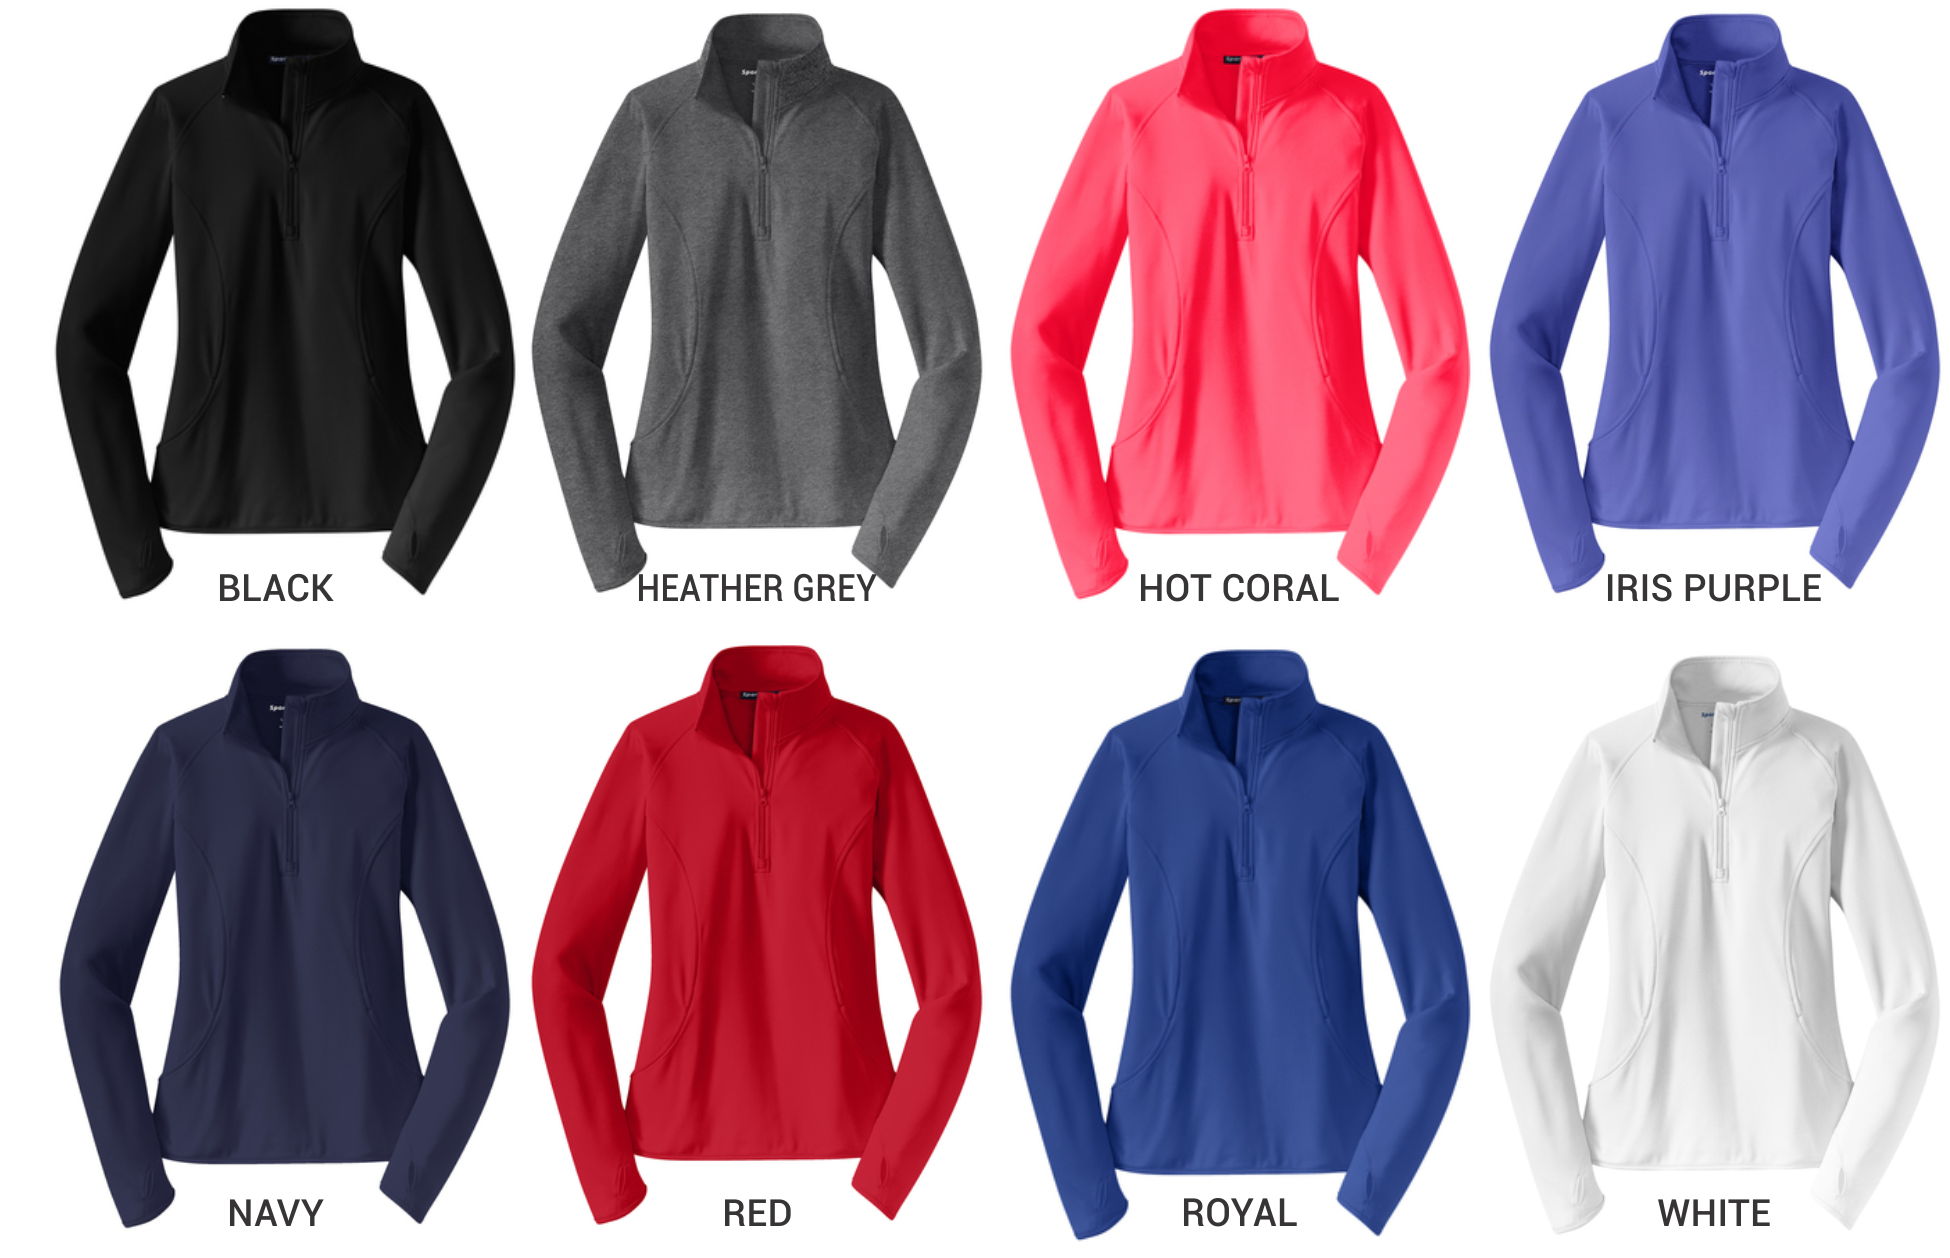 PHW - Physical Therapy Flag - Ladies 1/2 or Full Zip Jacket